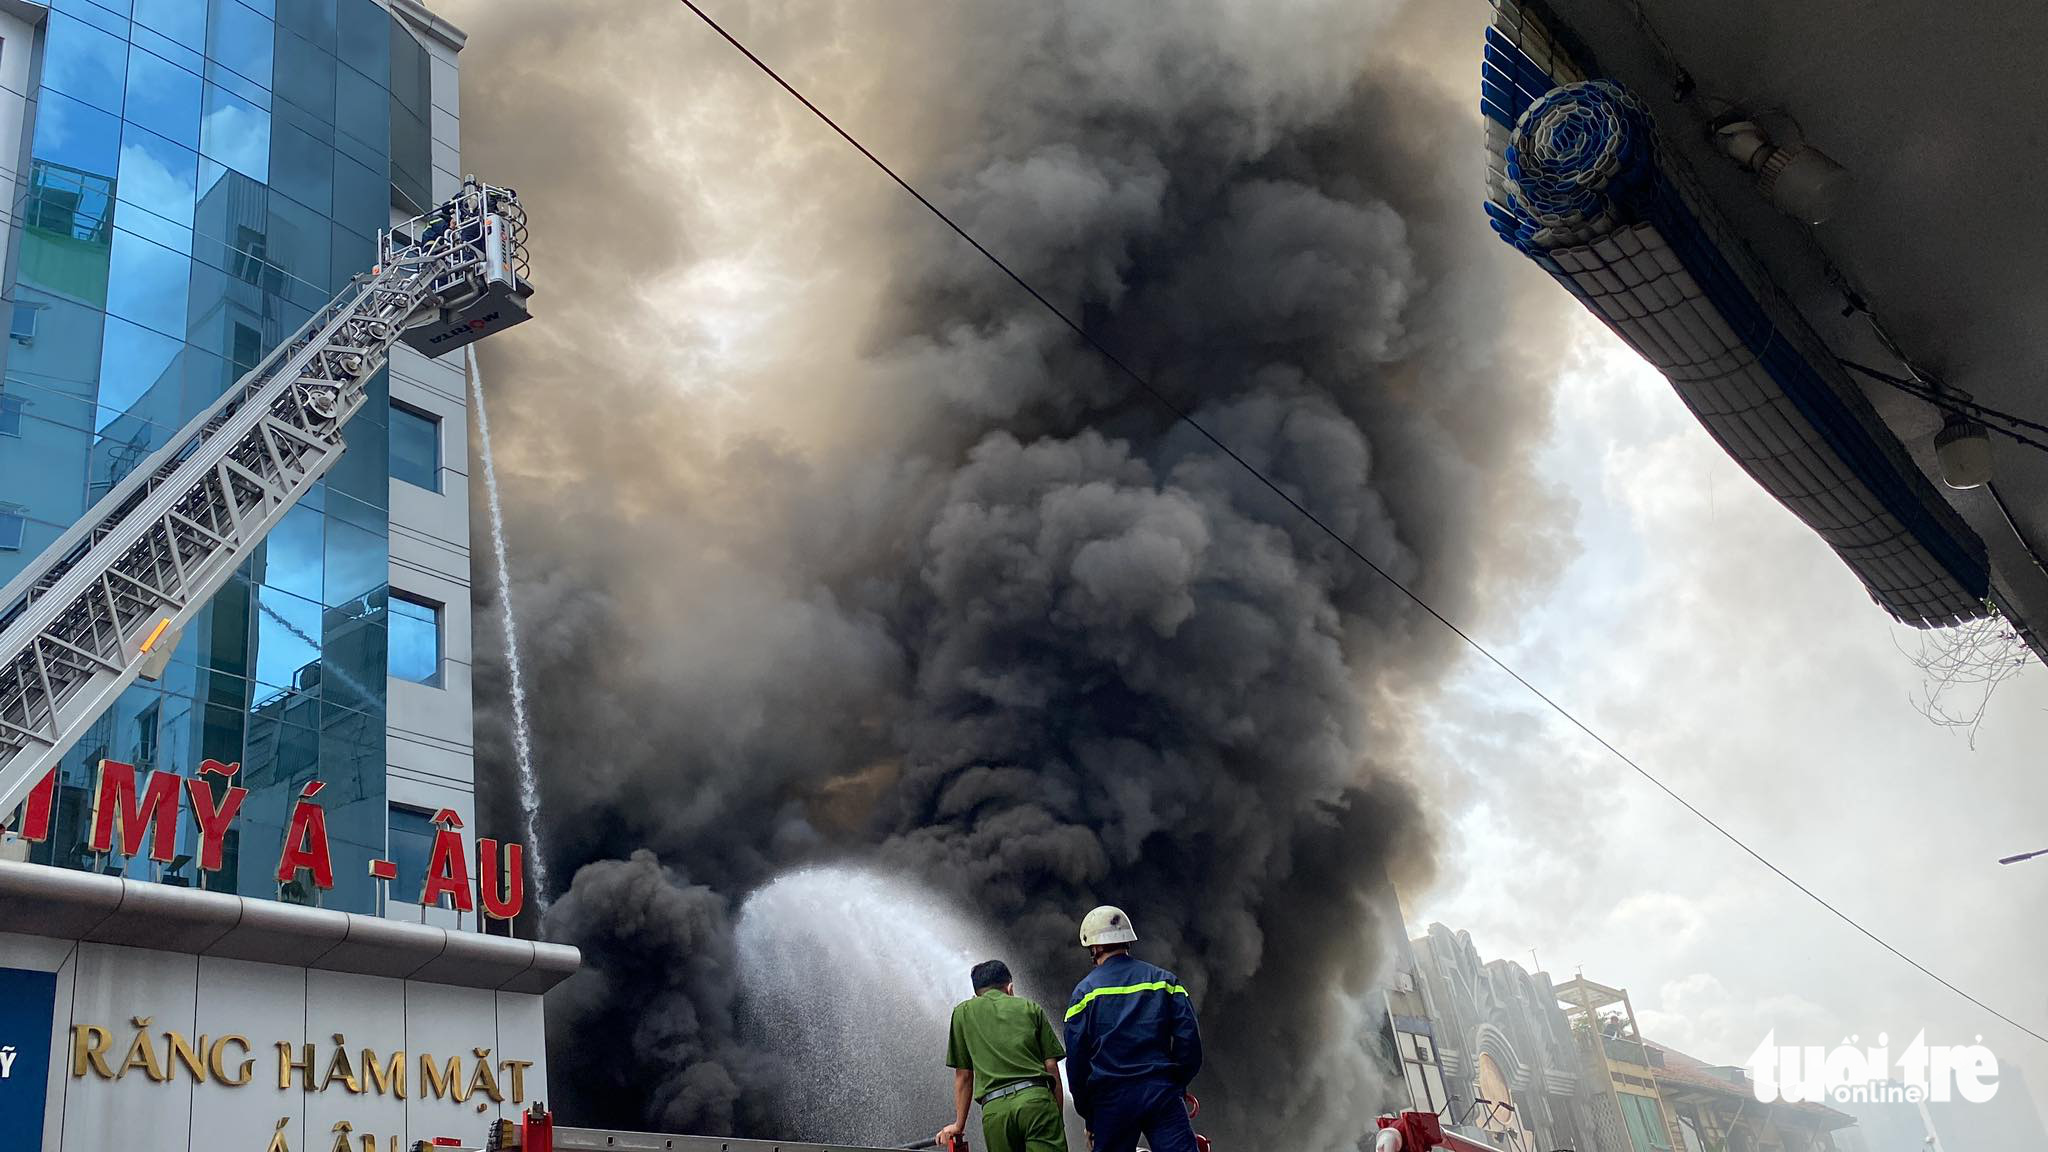 Fire engulfs restaurant in downtown Ho Chi Minh City